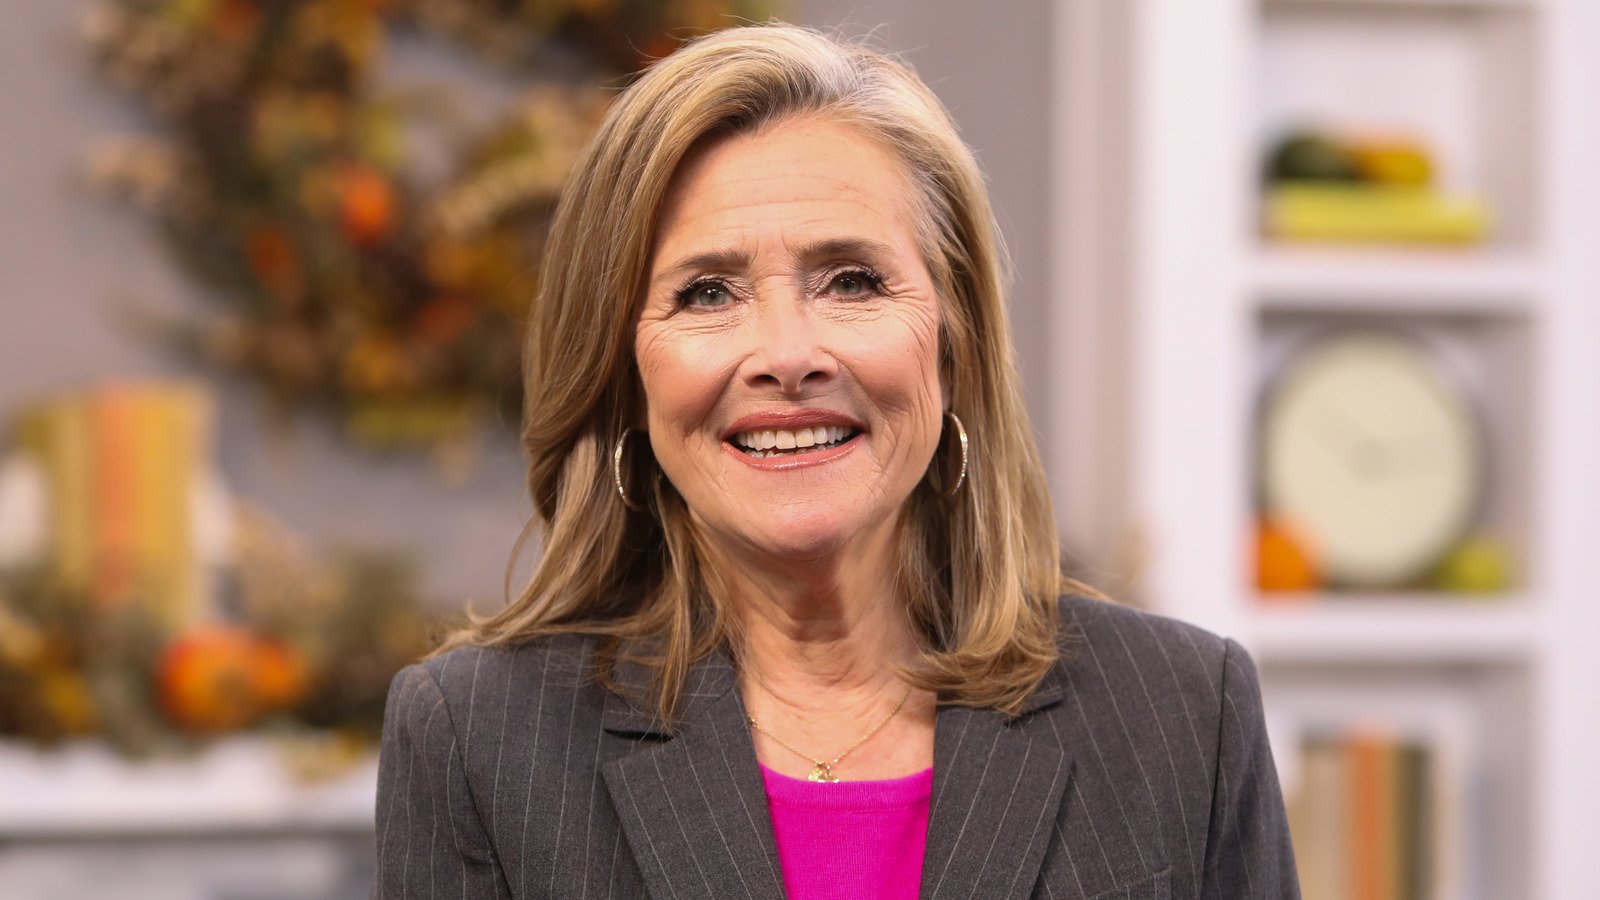 The Real Reason Meredith Vieira Left The Today Show